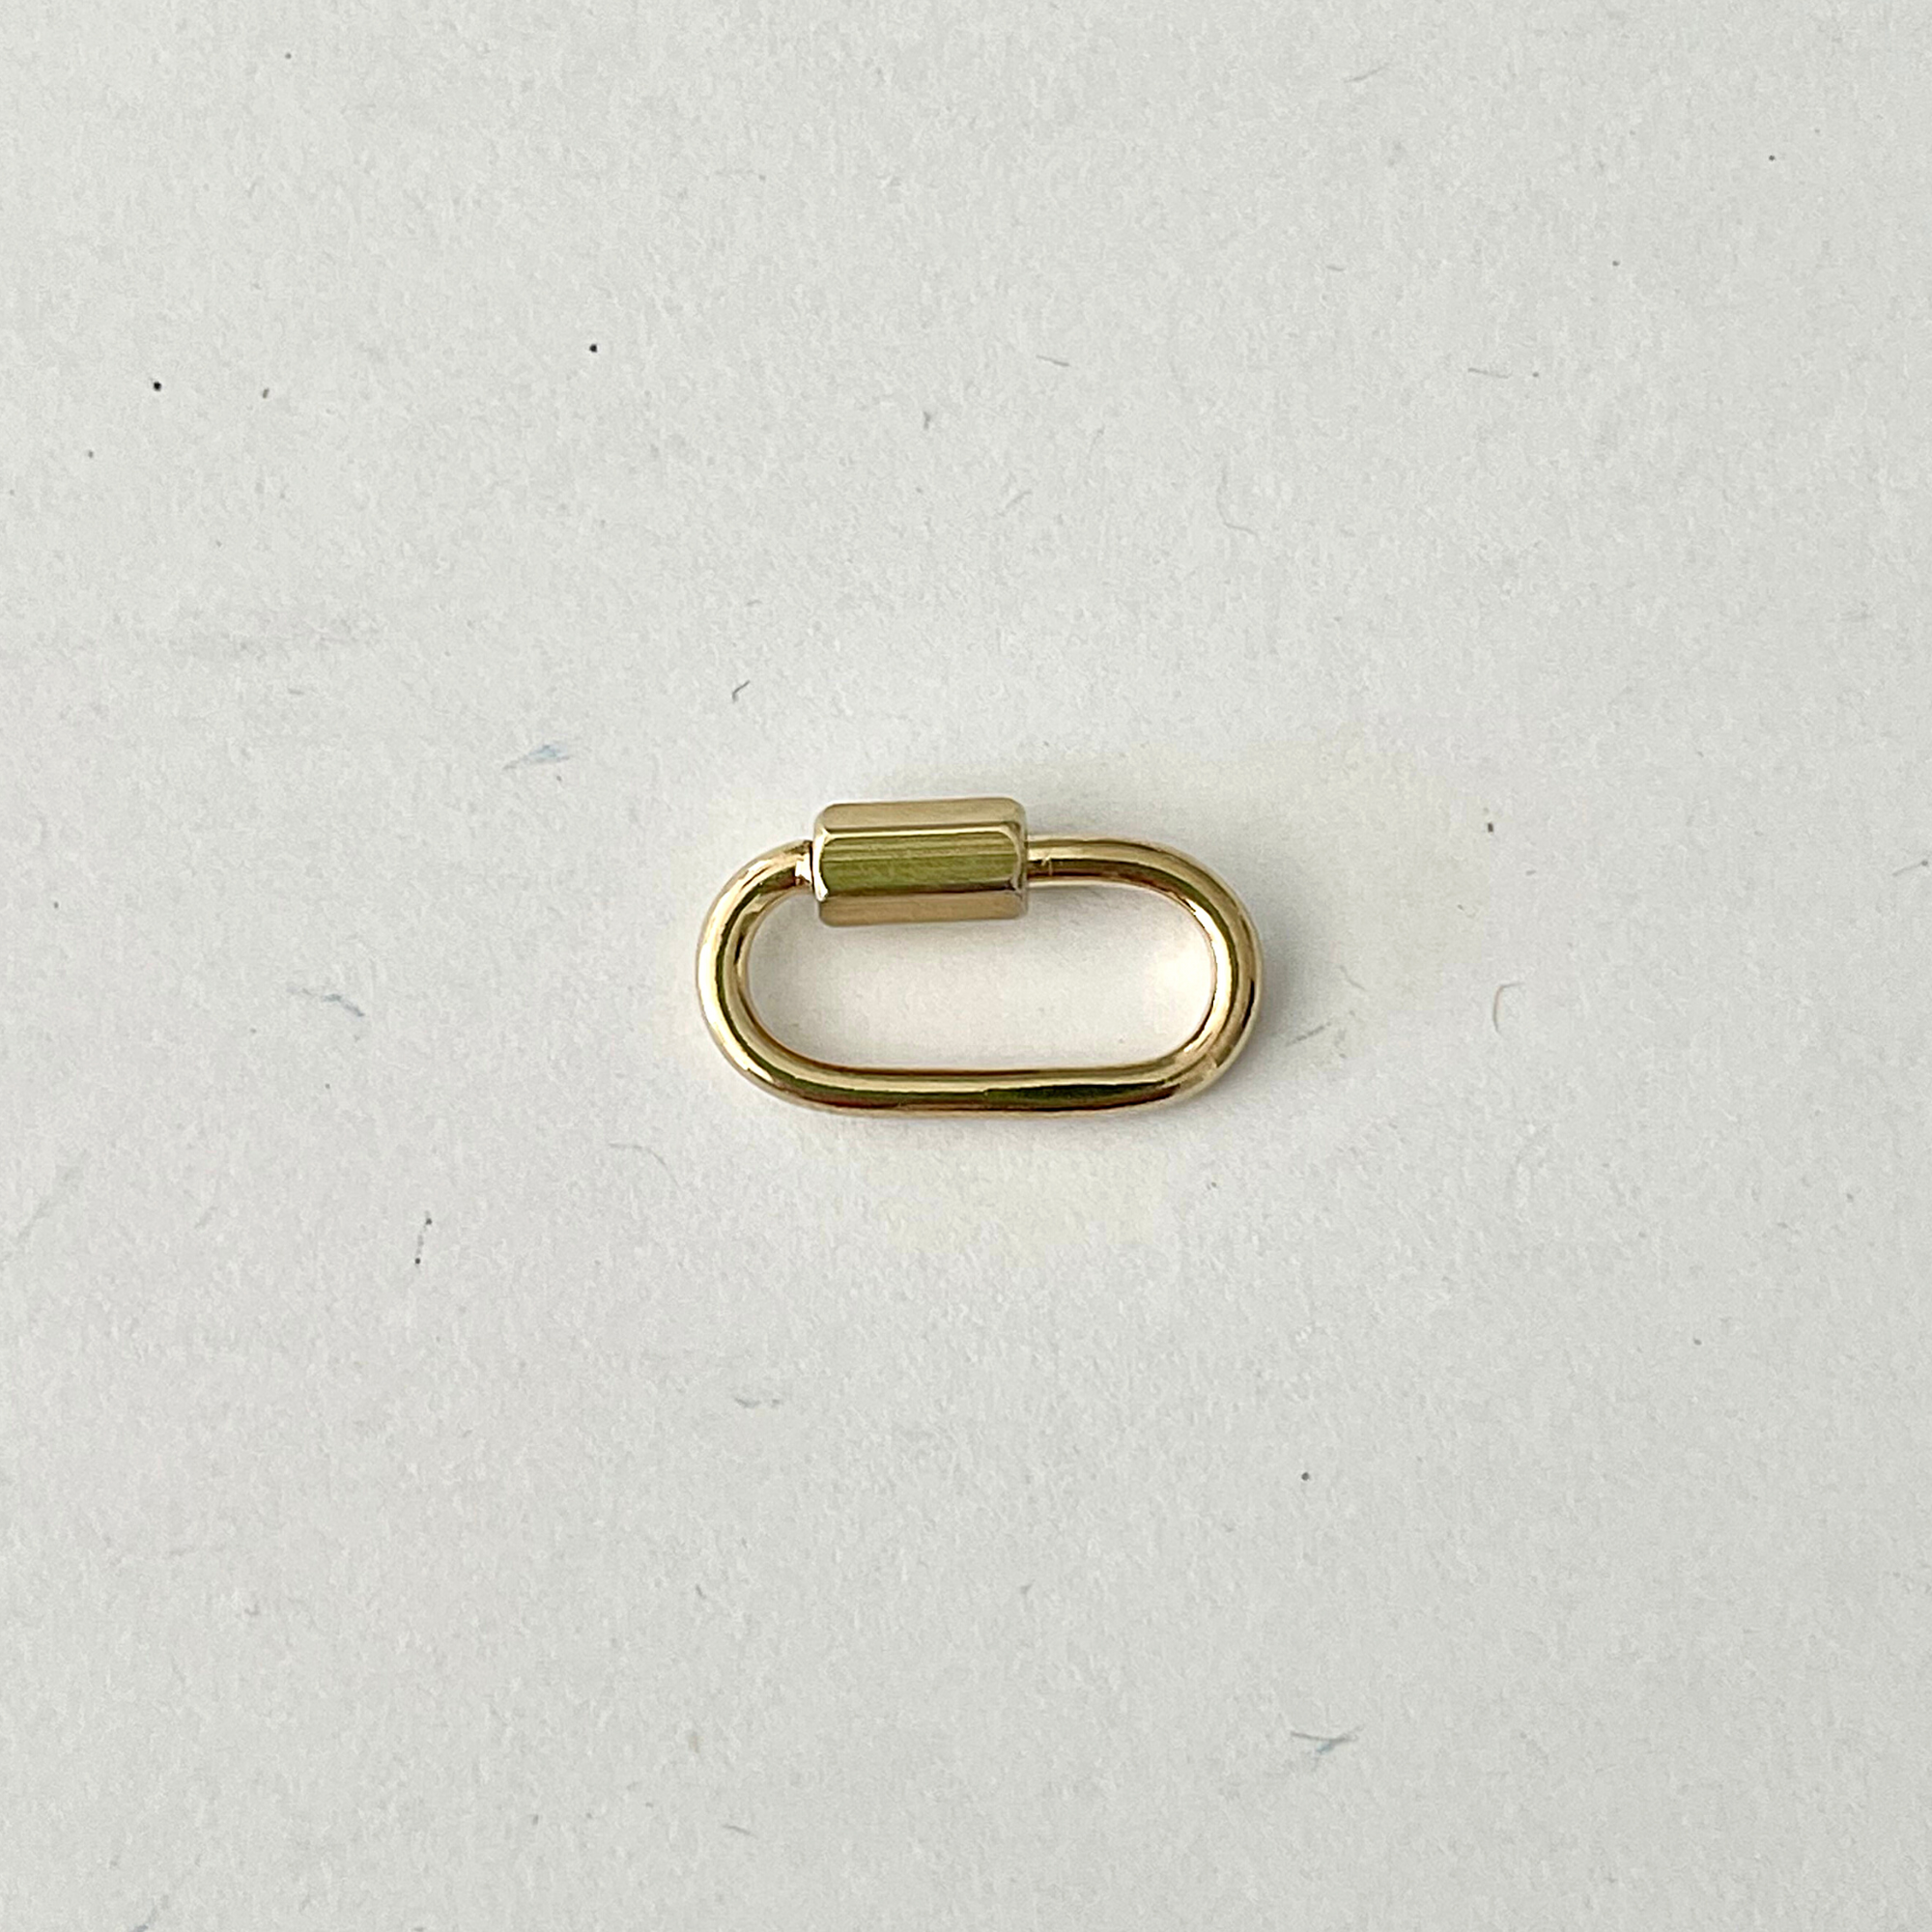 Beautiful and versatile 14K gold plate carabiner charm ring. Wear it on the front, hide it on the back, or personalize your necklace with multiple charms or a pendant.